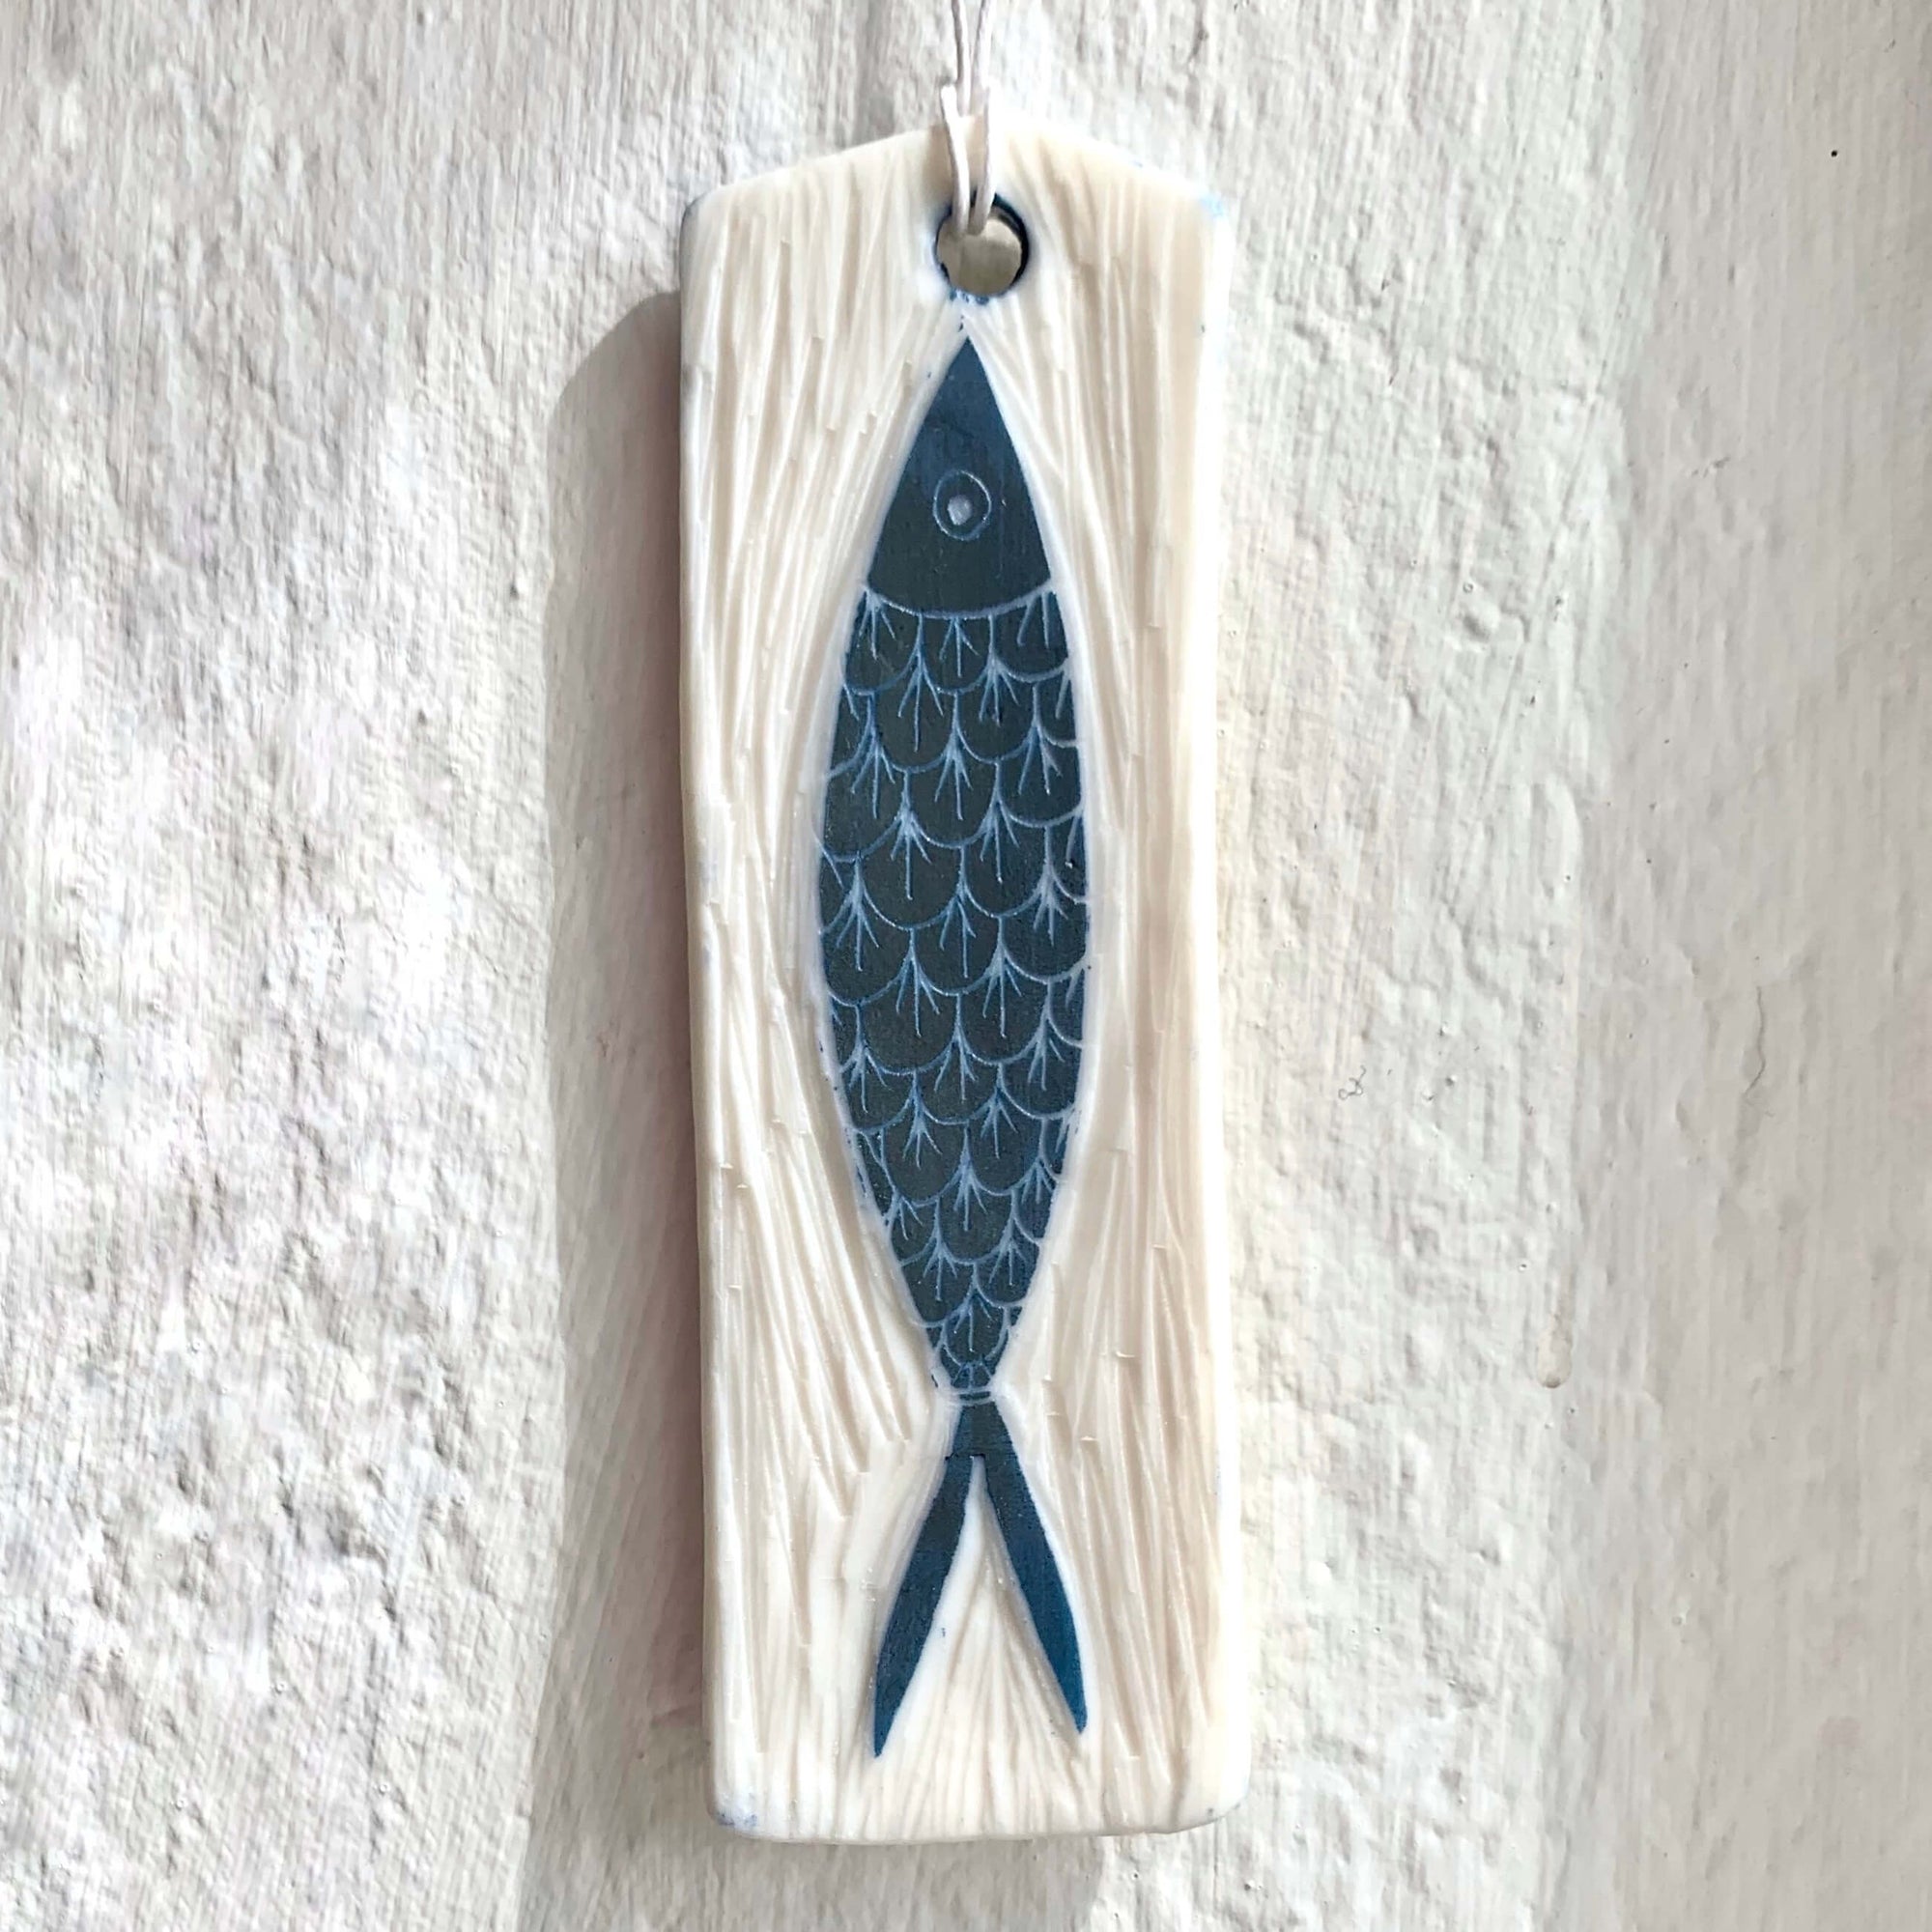 Handmade white porcelain rectangle wall hanging, with hand-carved blue fish with scale details.